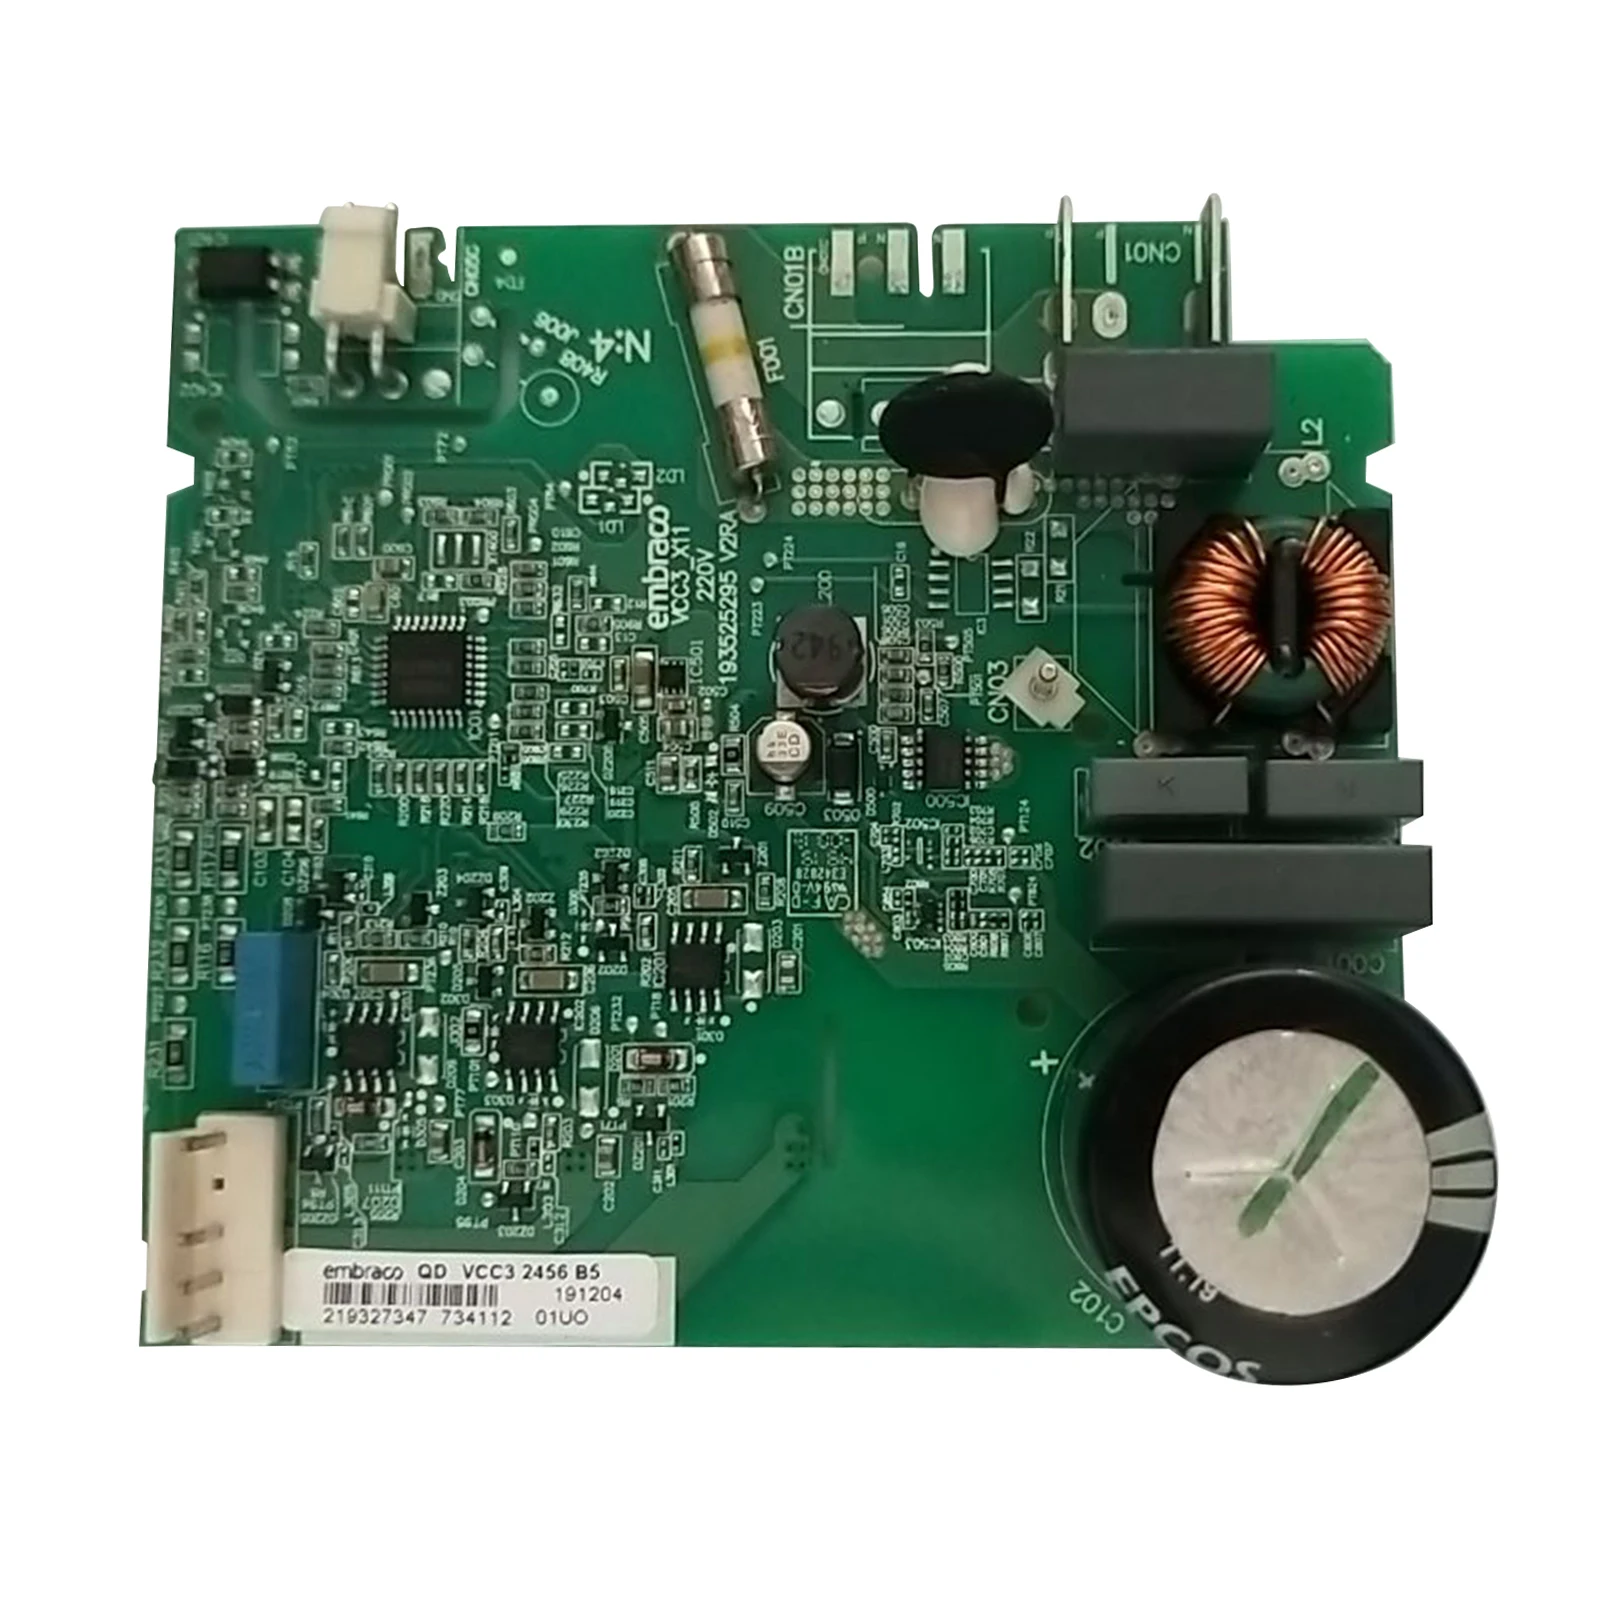 Conversion Board for Haier EECON Freezer QD VCC3 2456 95 Size 3.94